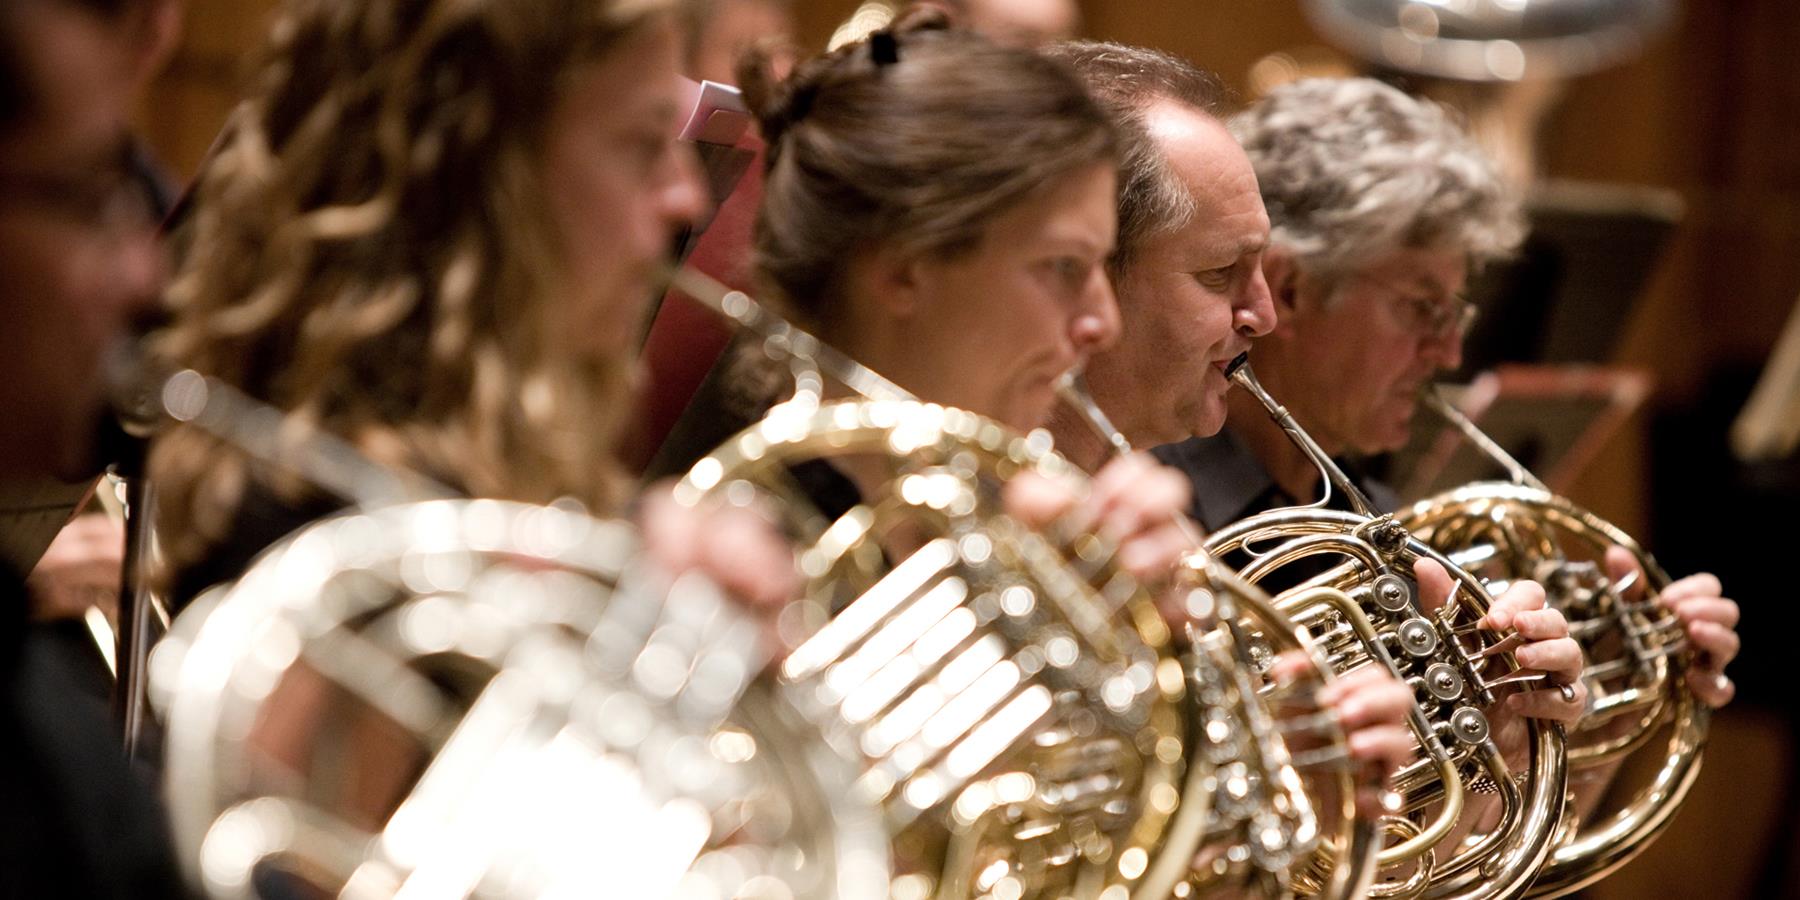 Members of an orchestra playing horns